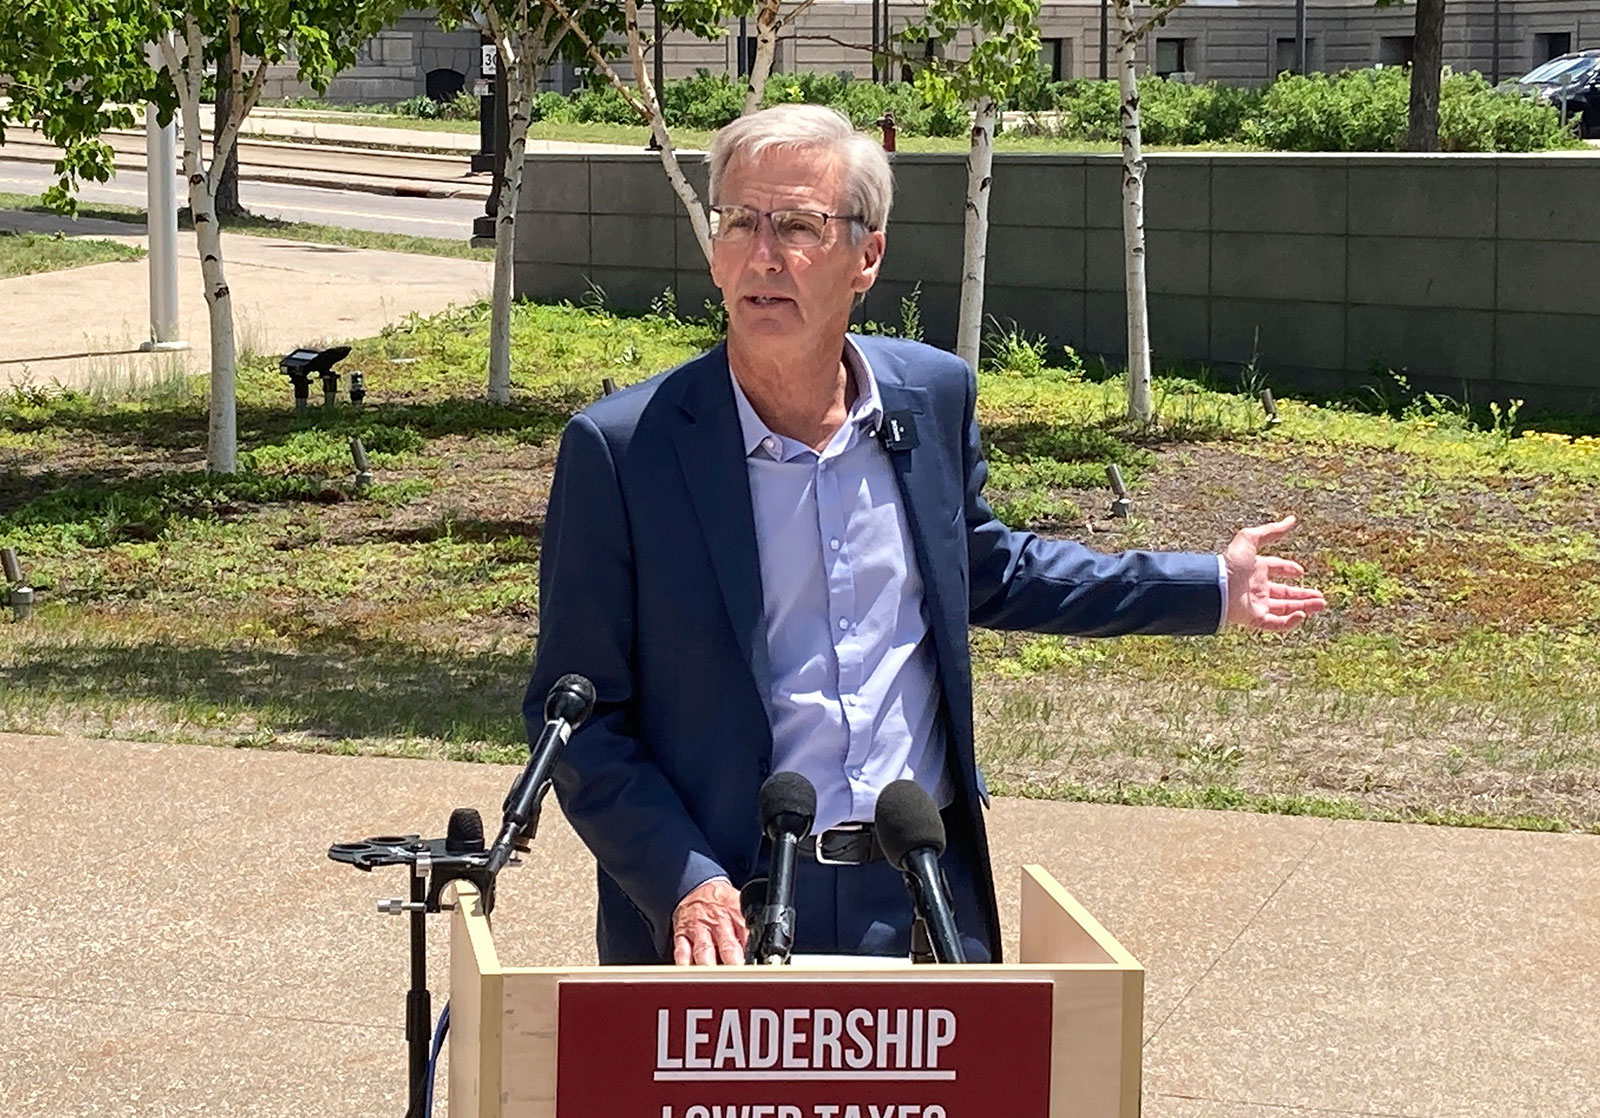 Scott Jensen speaks at a news conference outside the state capitol in St. Paul, Minnesota, on June 9.